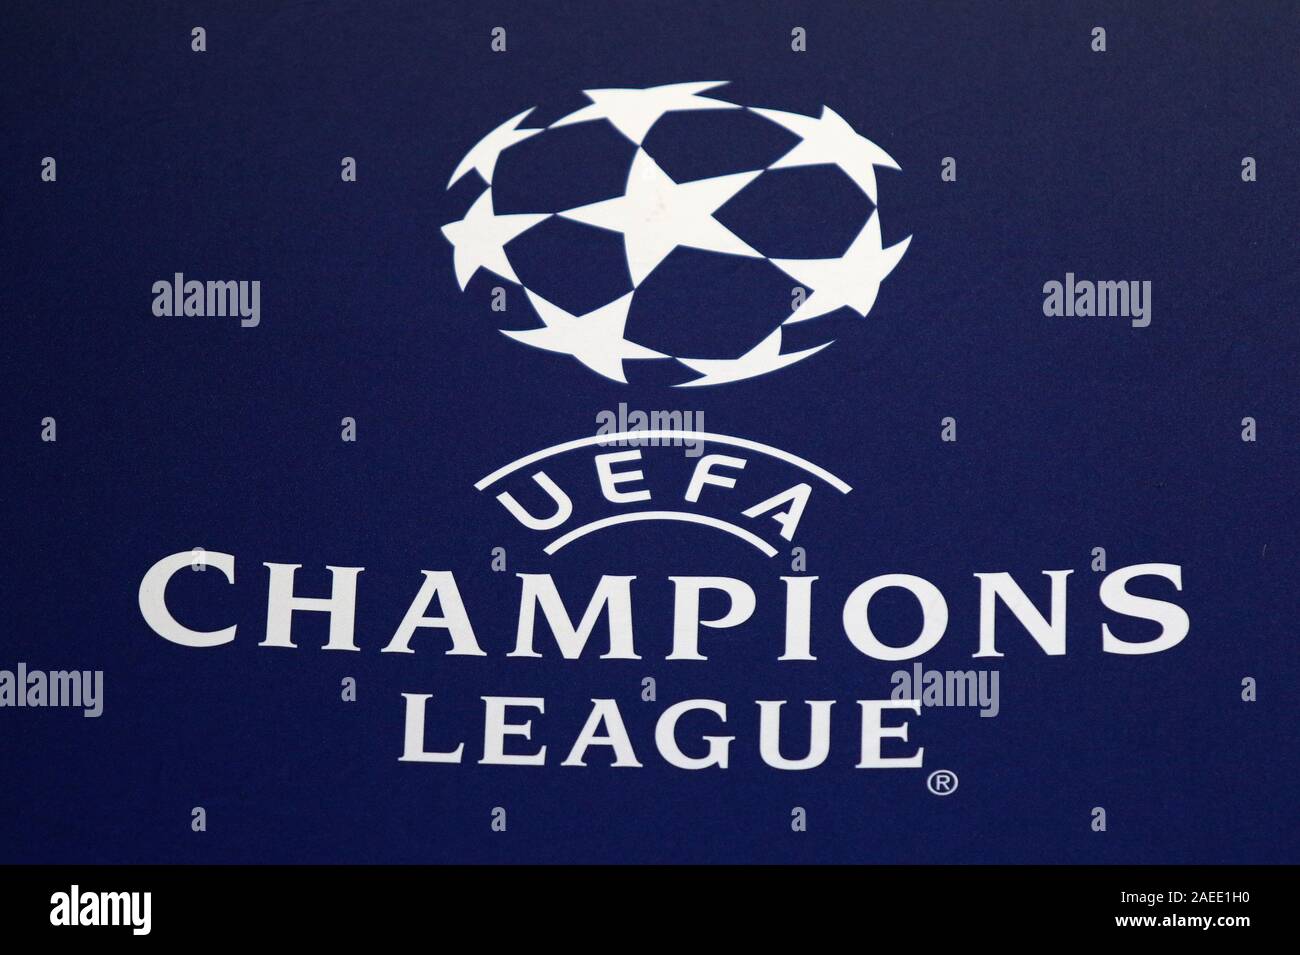 PRAGUE, CZECHIA - OCTOBER 23, 2019: Official UEFA Champions League logo on the decoration board seen during the UEFA Champions League game between Slavia Praha and Barcelona at Eden Arena in Prague Stock Photo